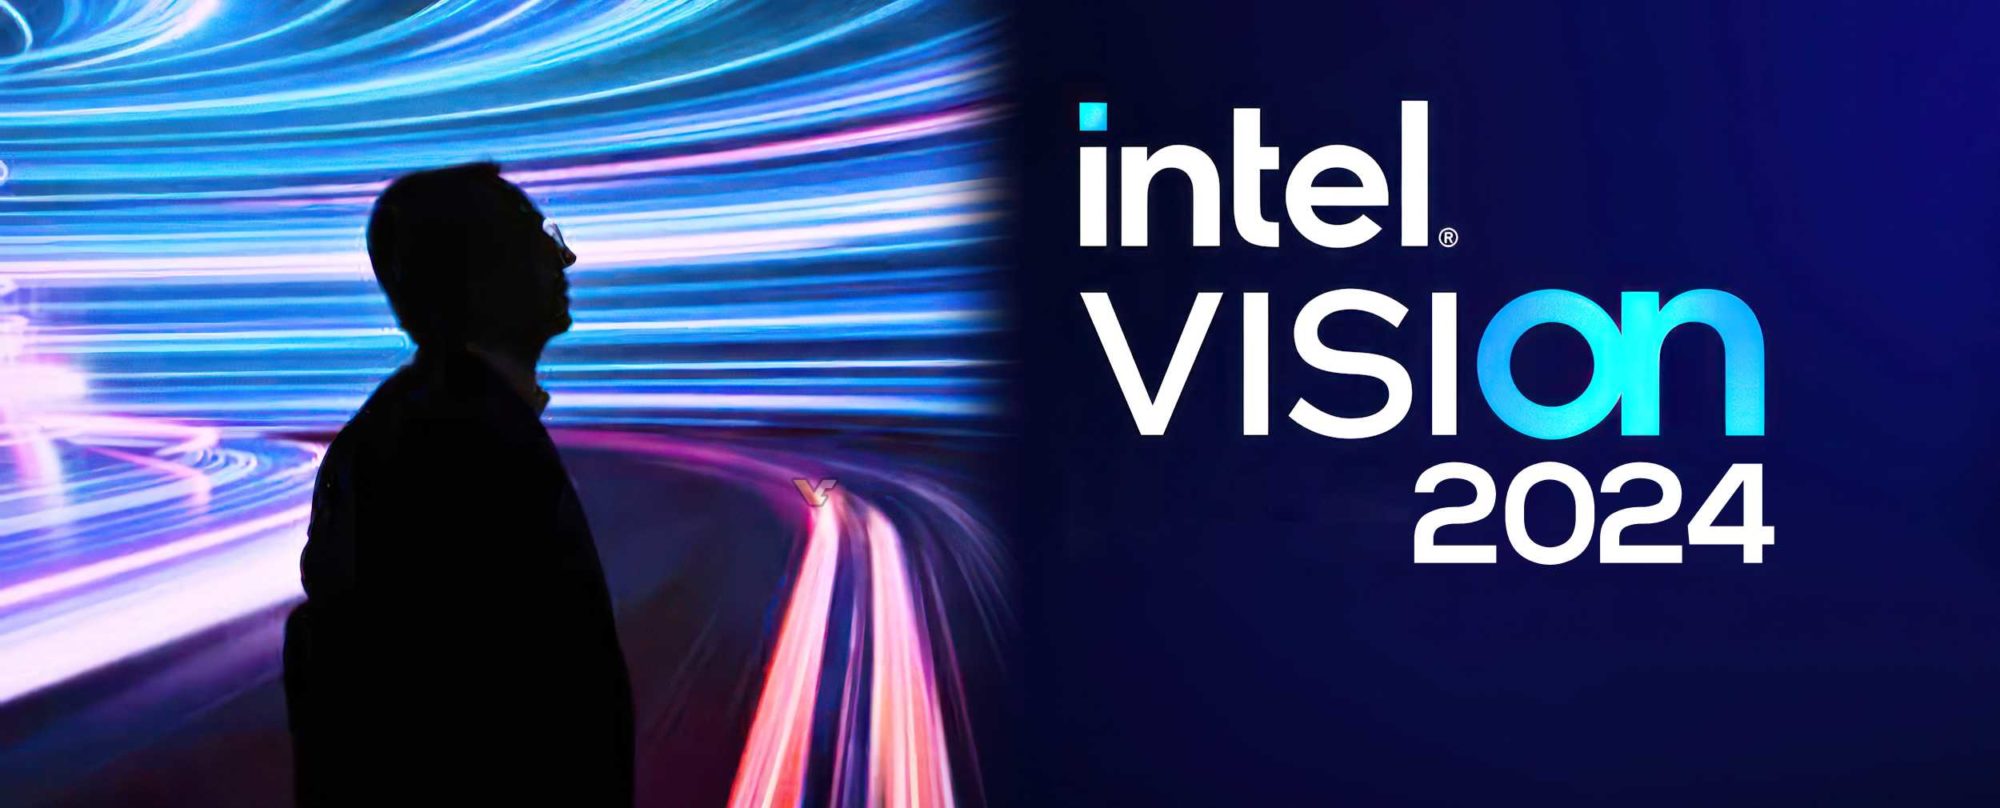 Intel sets the stage for "Vision 2024" event slated in April 2024